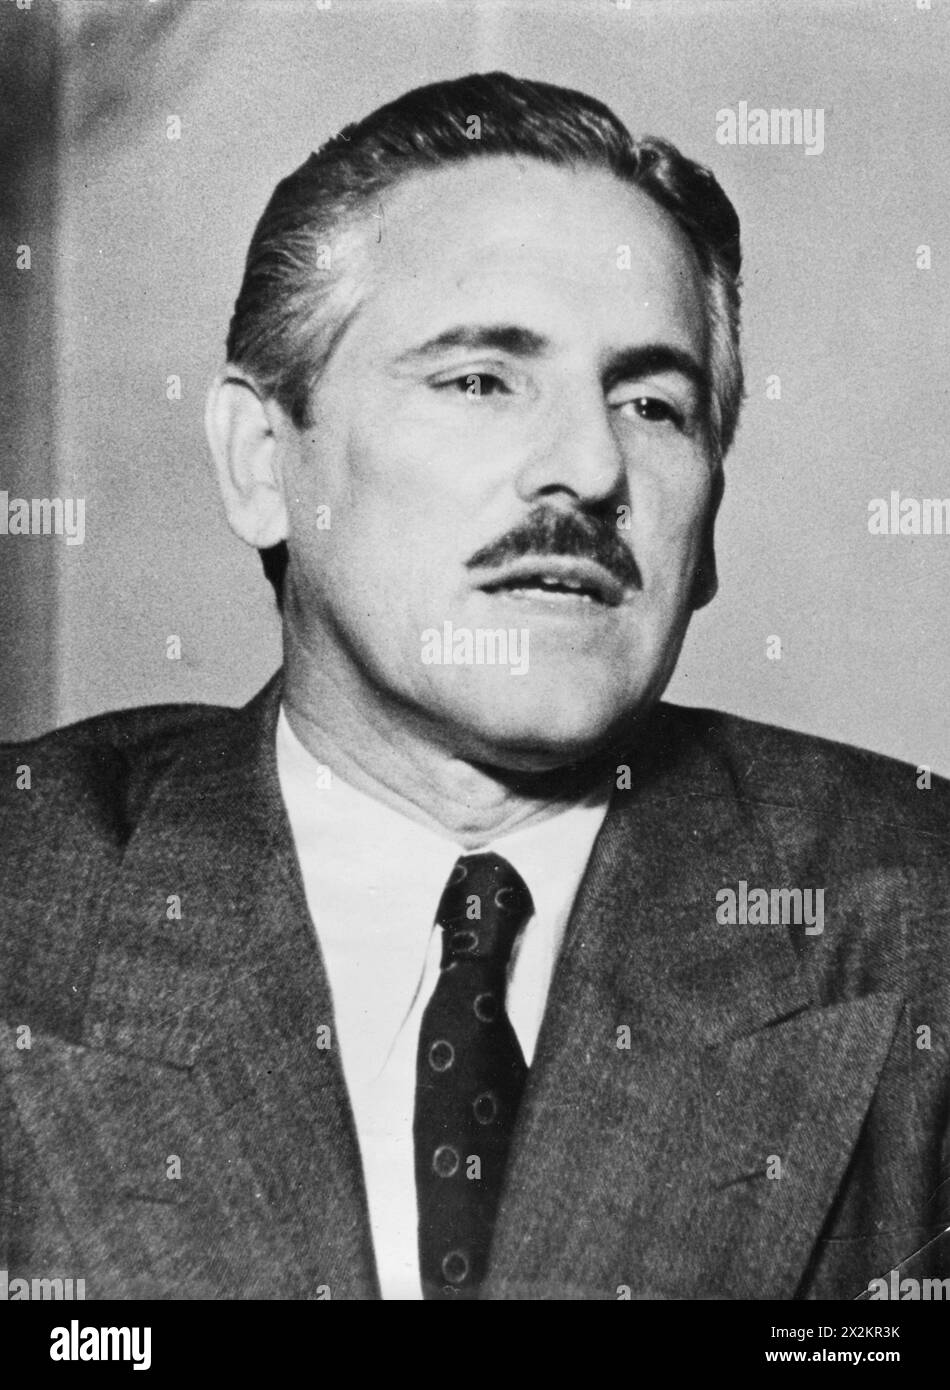 Prio Socarras, Carlos, 14.7.1903 - 5.4.1977, Cuban politician (PRC), after his escape from Cuba, ADDITIONAL-RIGHTS-CLEARANCE-INFO-NOT-AVAILABLE Stock Photo